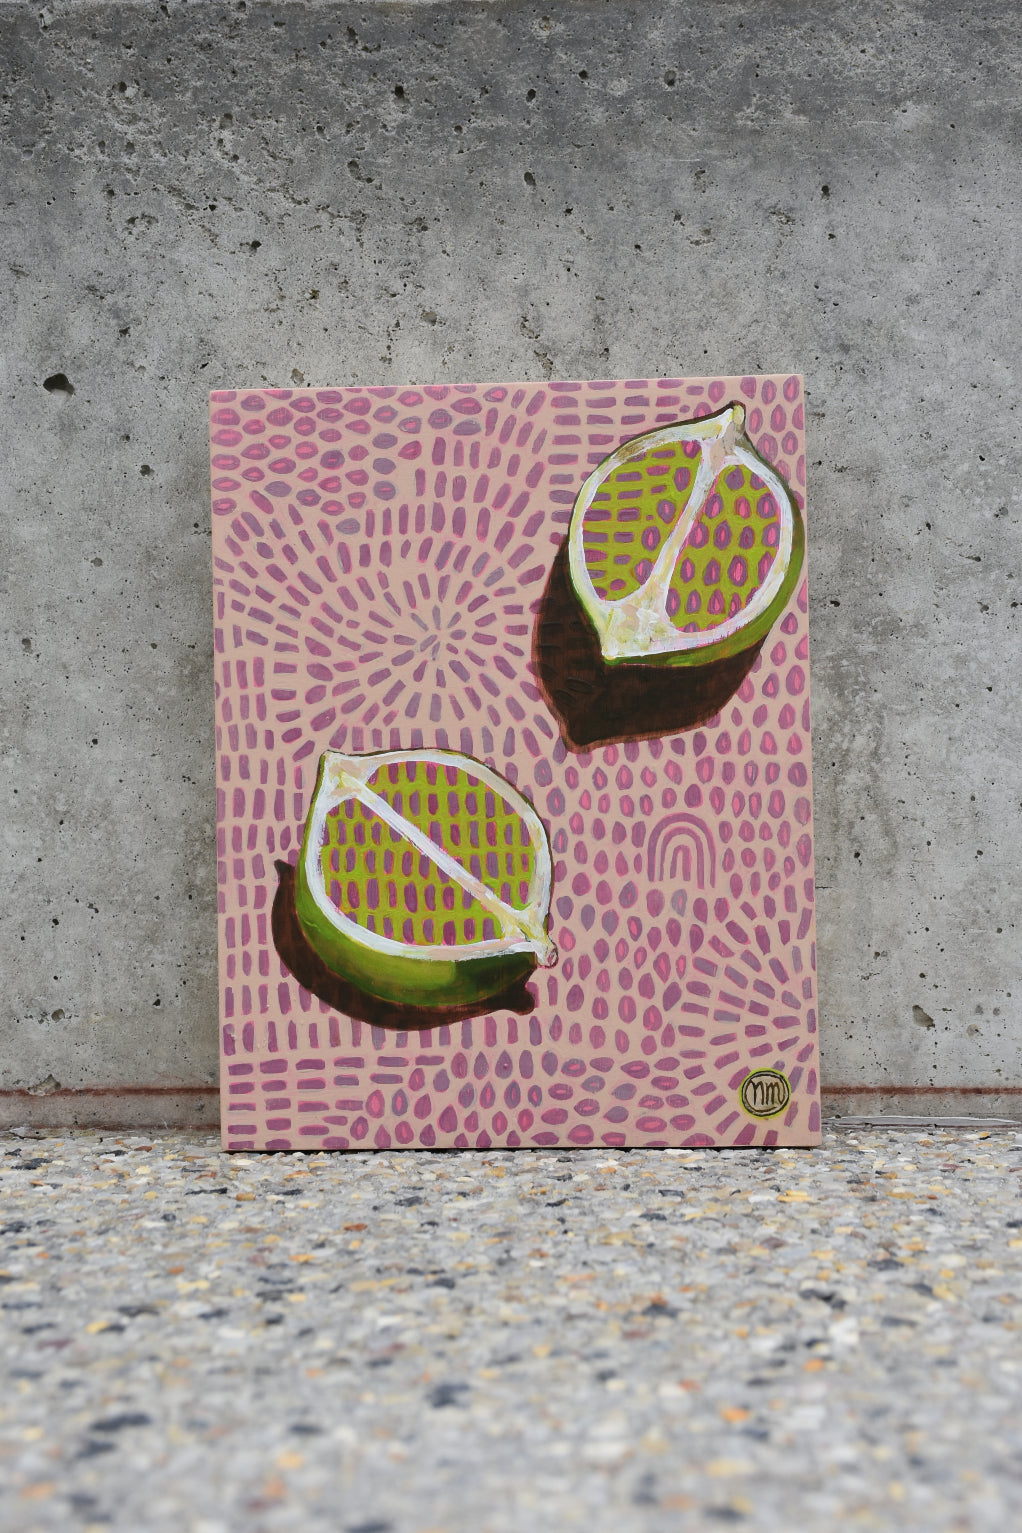 Two halves of a lime on a patterned background. An original painting by West Australian artist Natasha Mott.